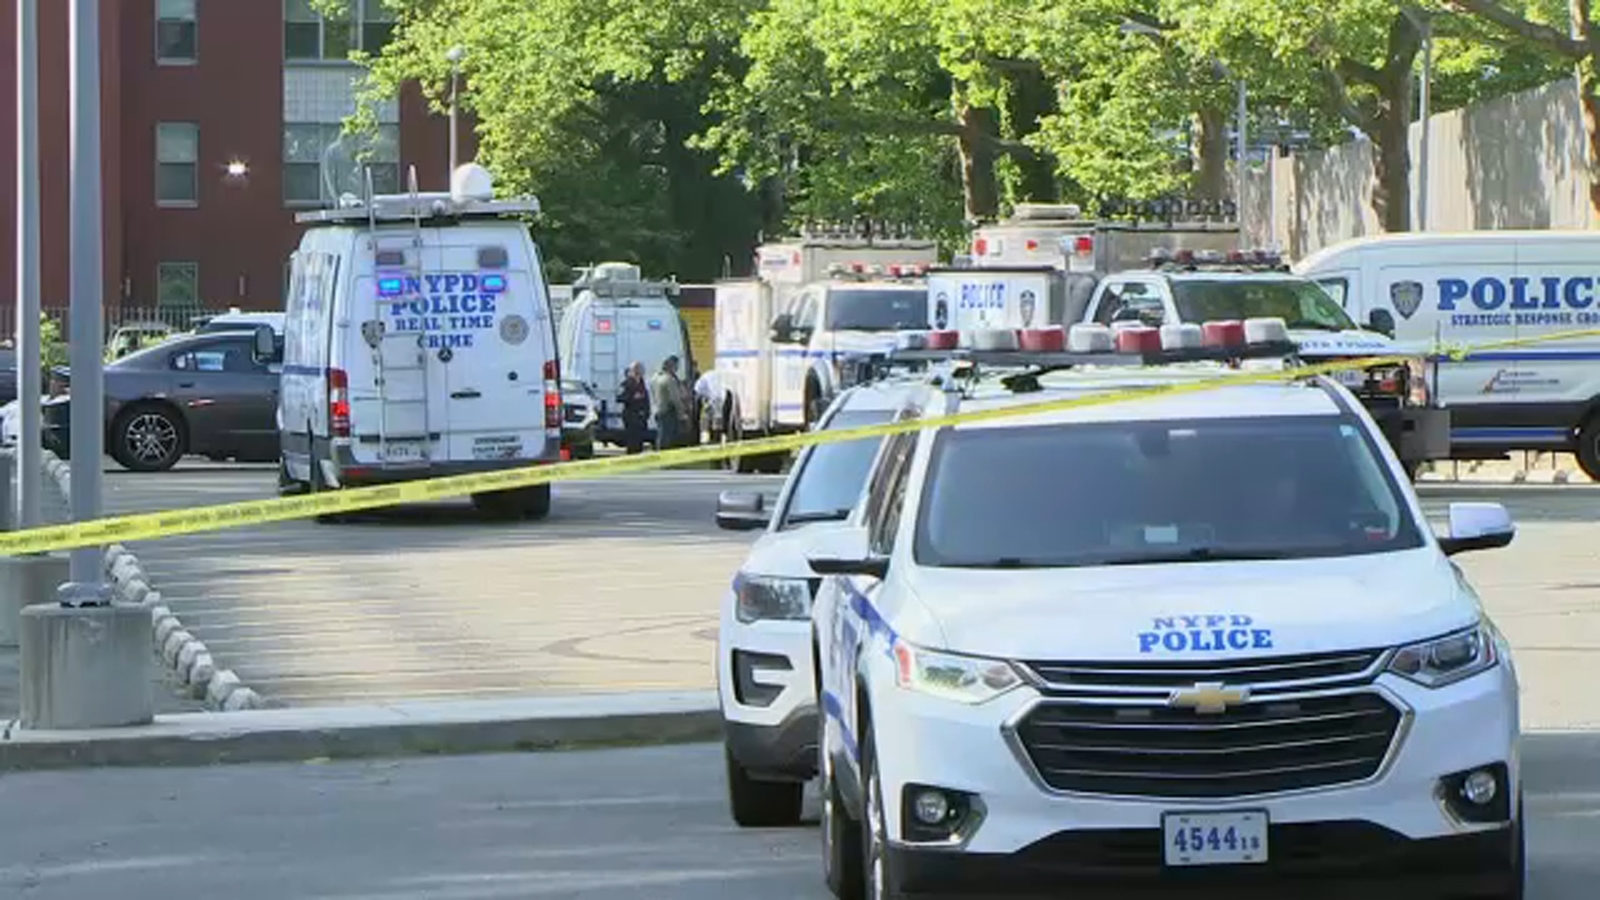 13-year-old boy in critical condition after being shot on Staten Island